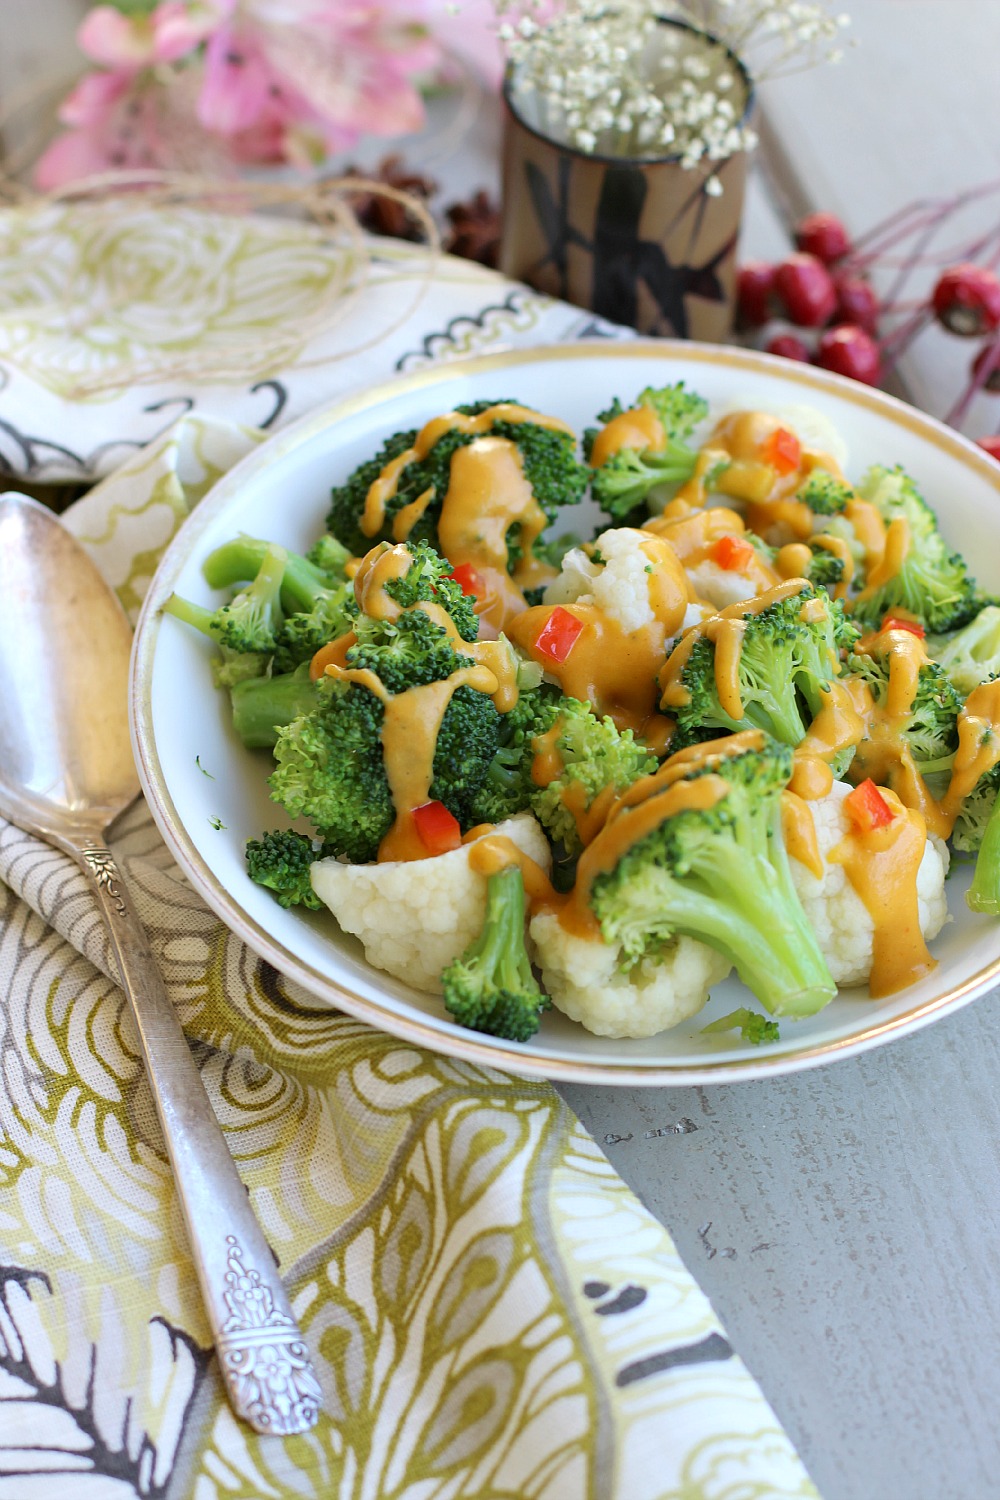 Steamed broccoli & cauliflower with coconut curry squash sauce